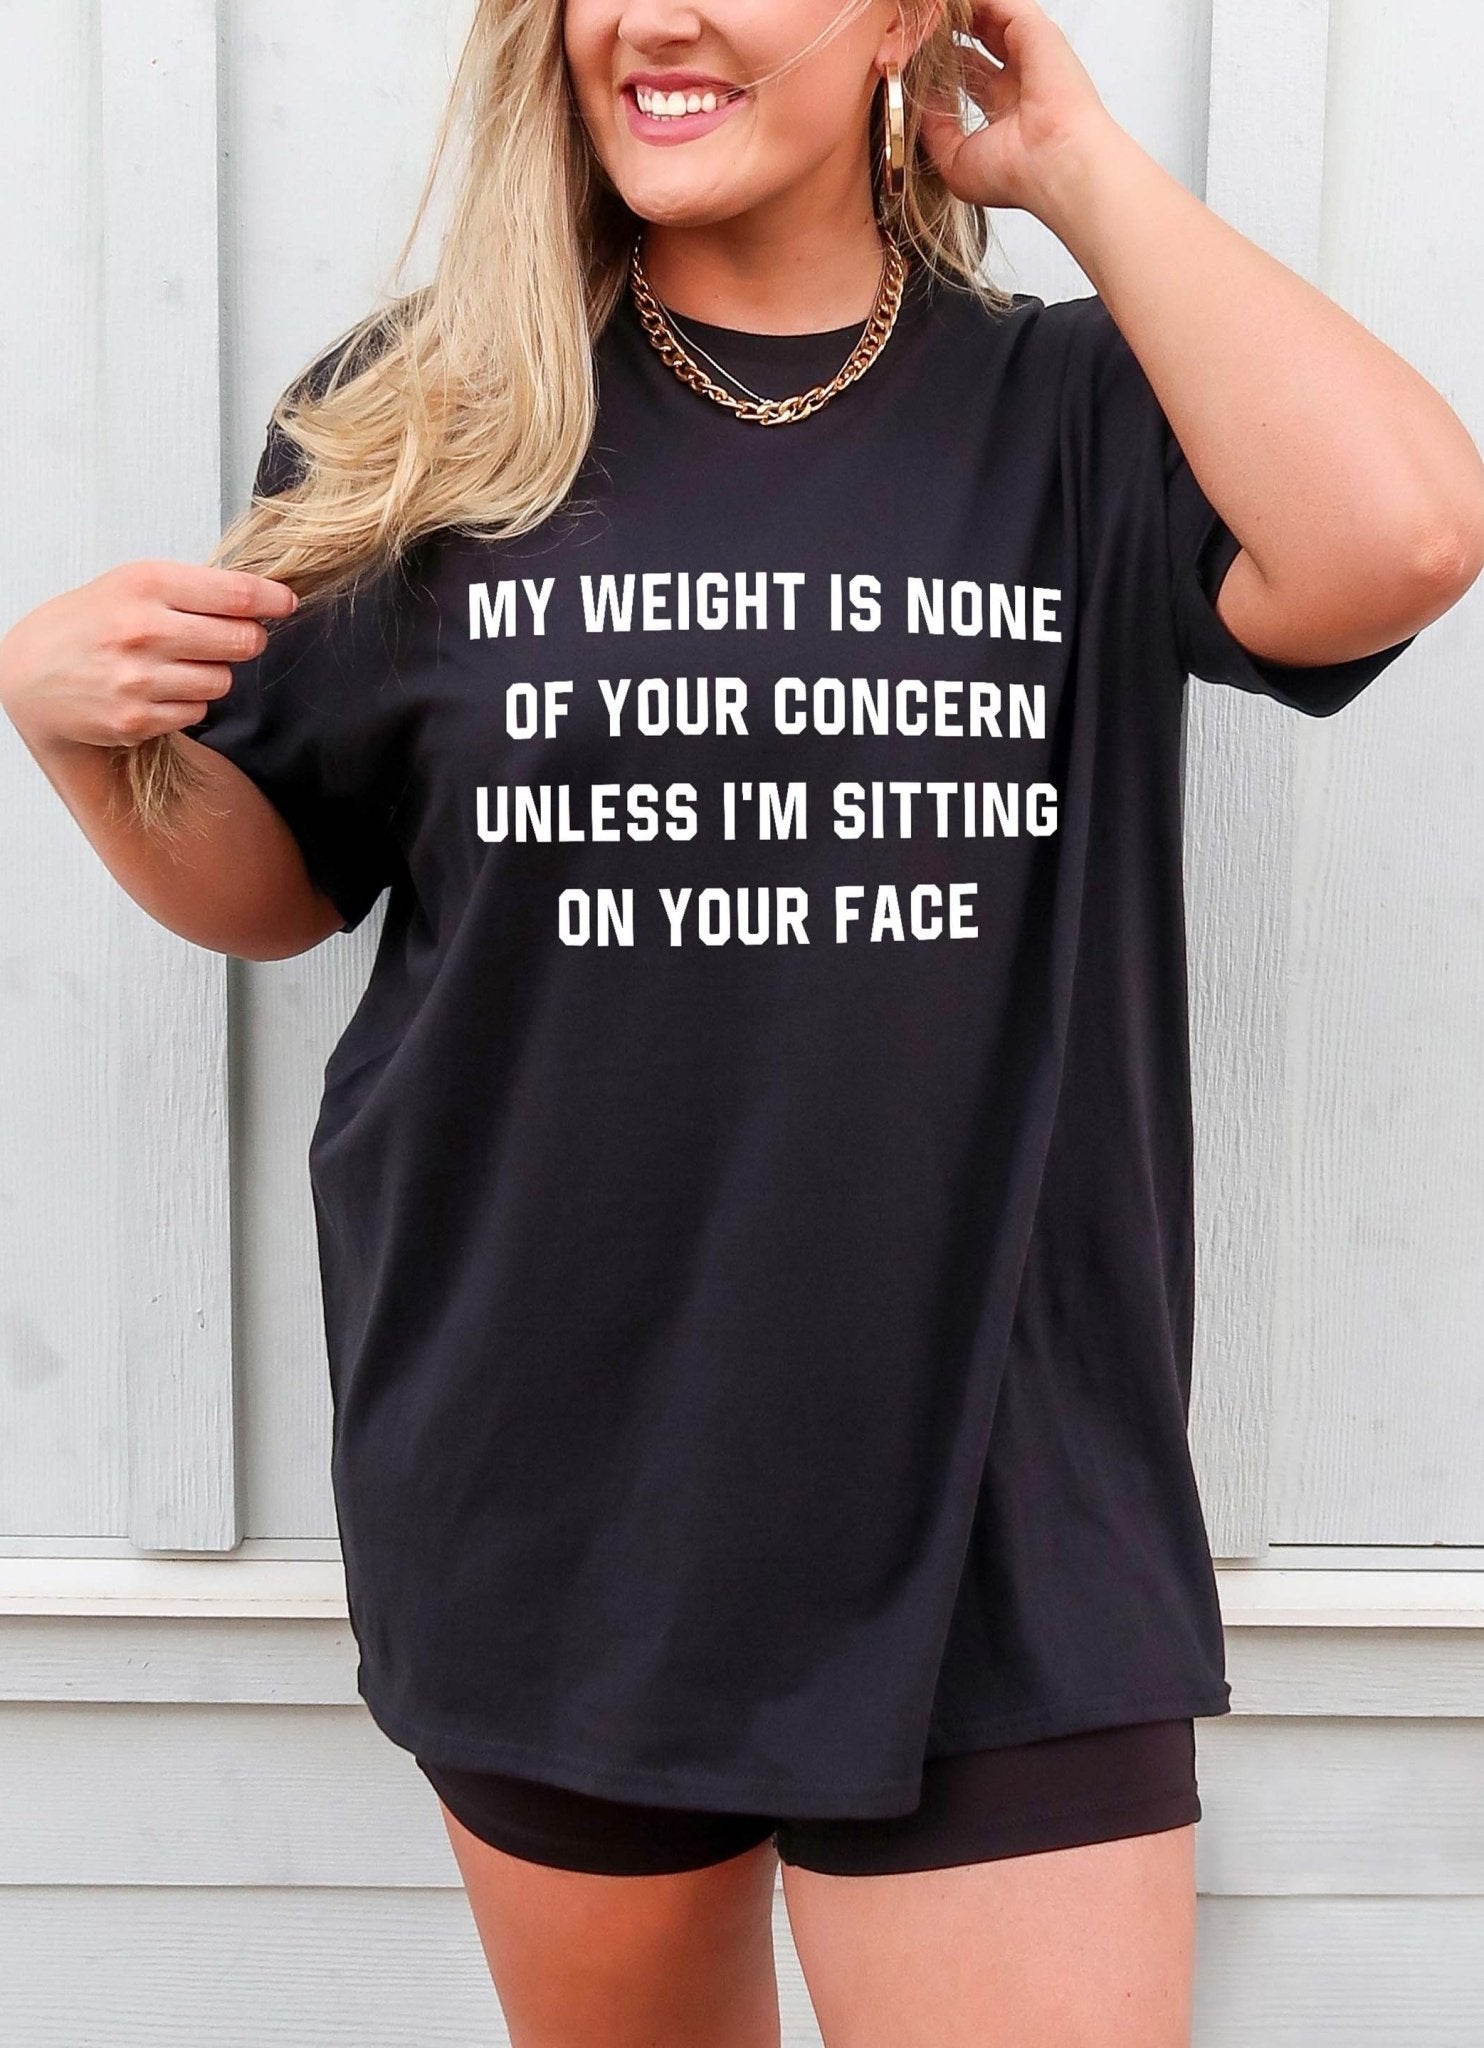 My Weight Is None Of Your Concern Unless I'm Sitting On Your Face Unisex Tee - UntamedEgo LLC.